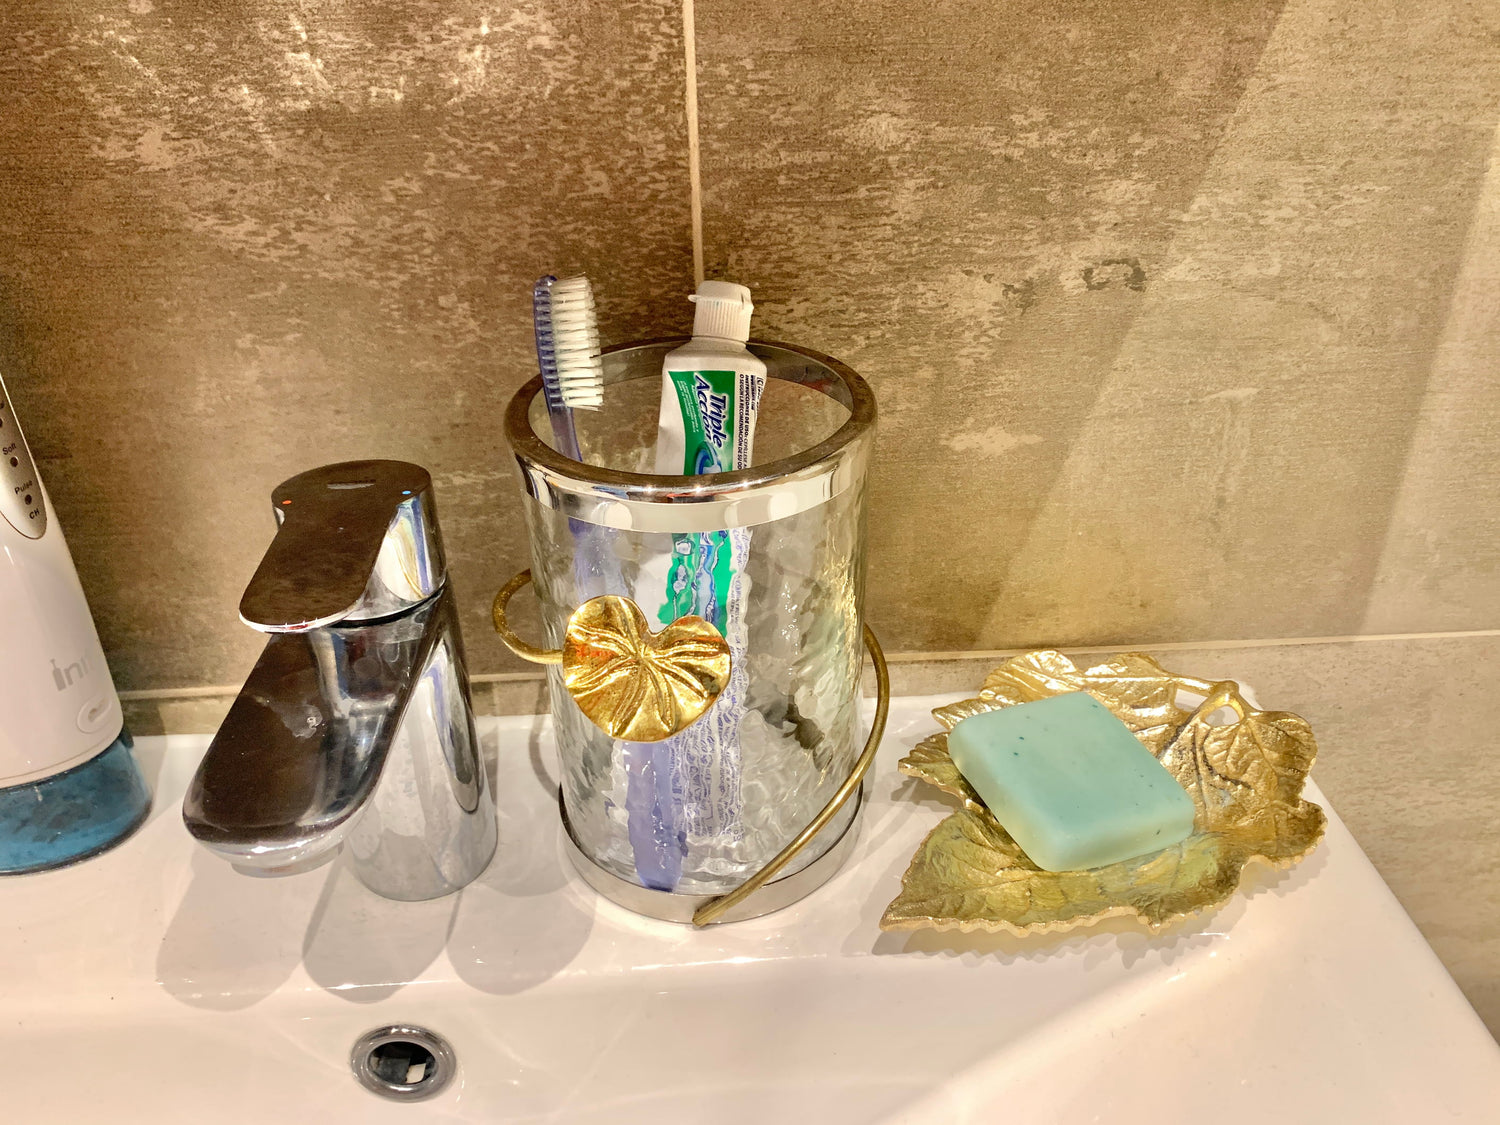 Glass jar with lotus design used in bathroom